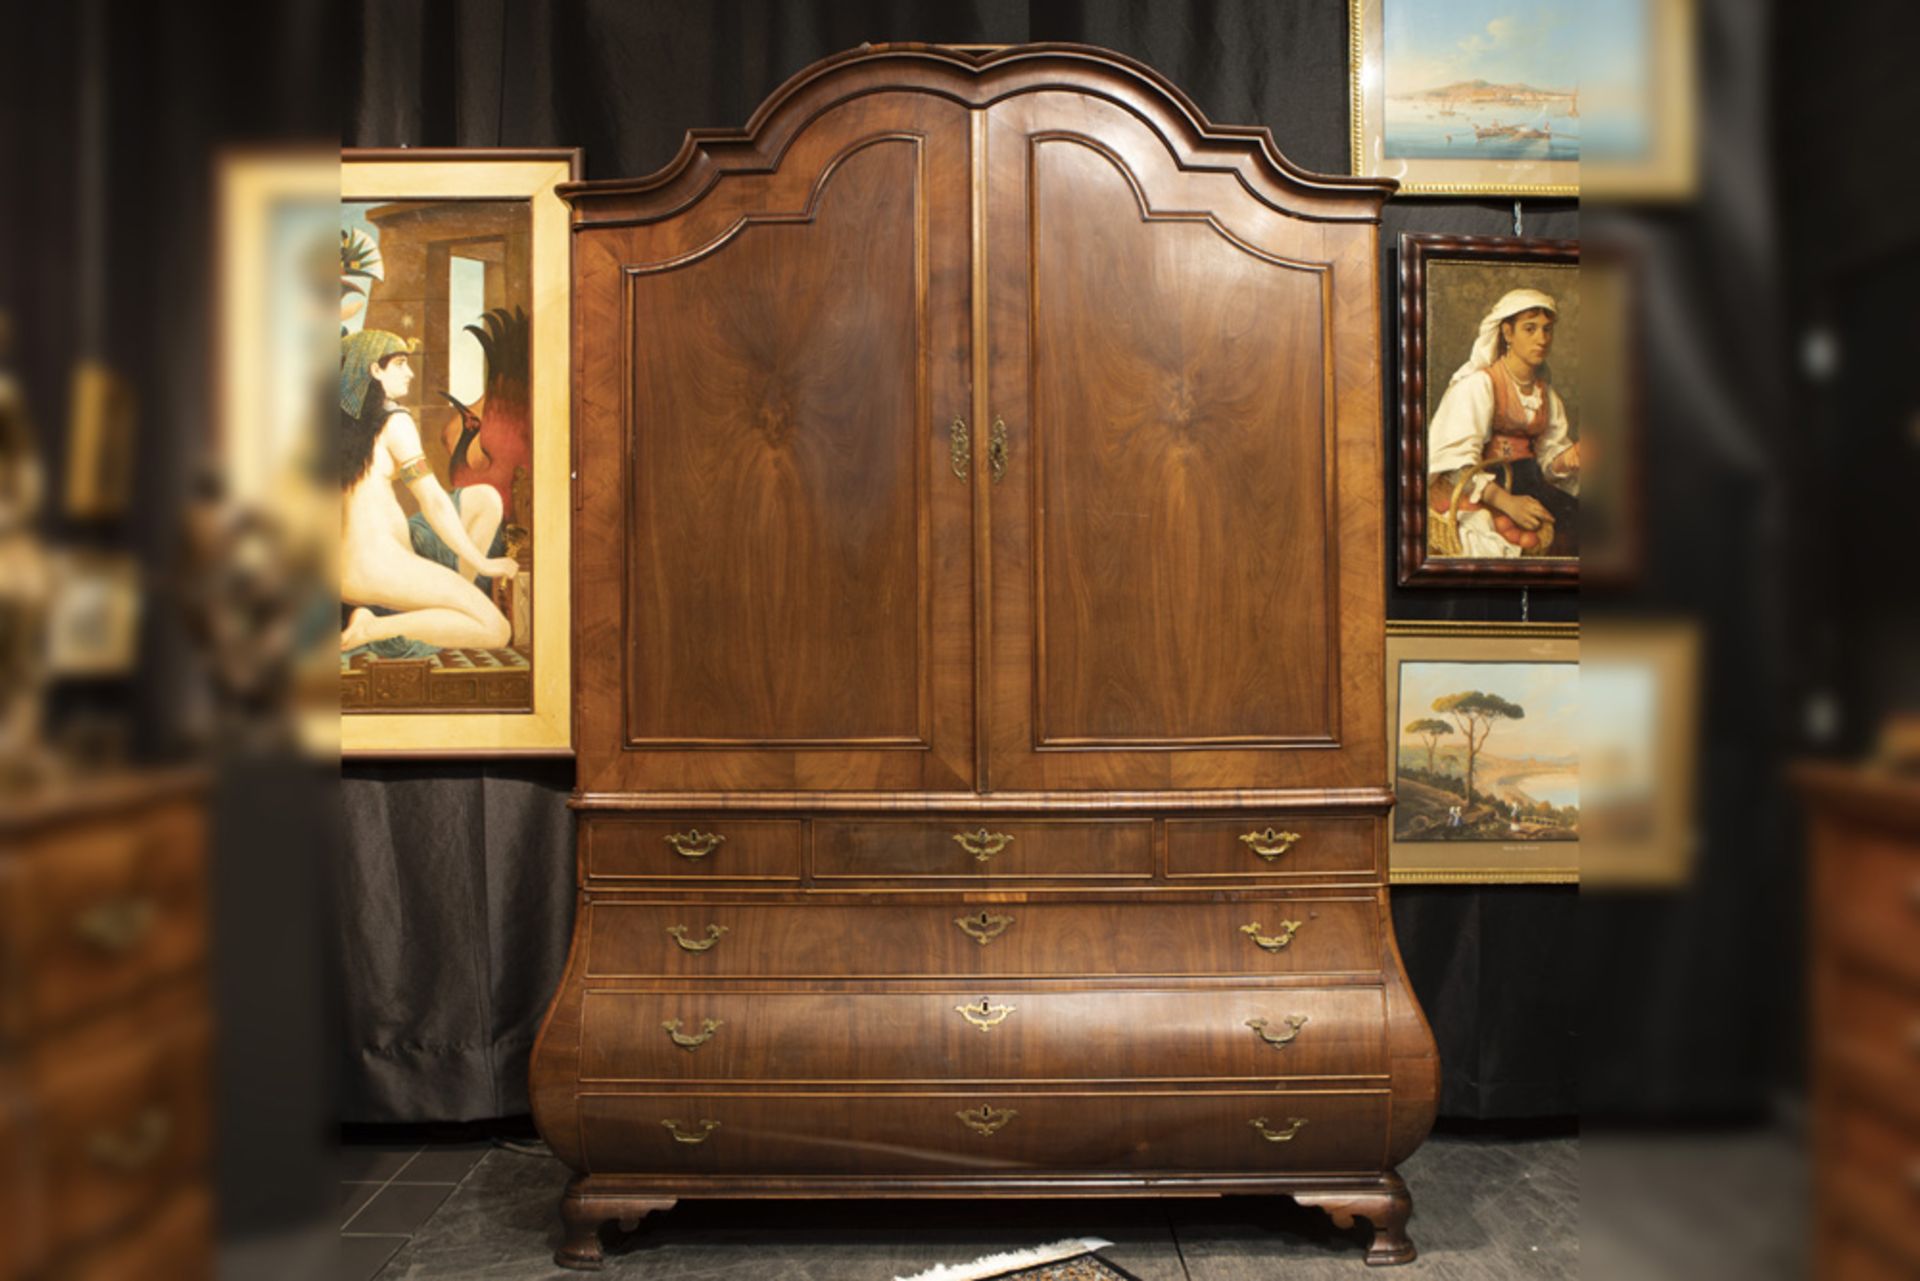 18th Cent. Dutch cabinet with bureau in mahogany - with certificate || NEDERLAND - 18° EEUW mooi